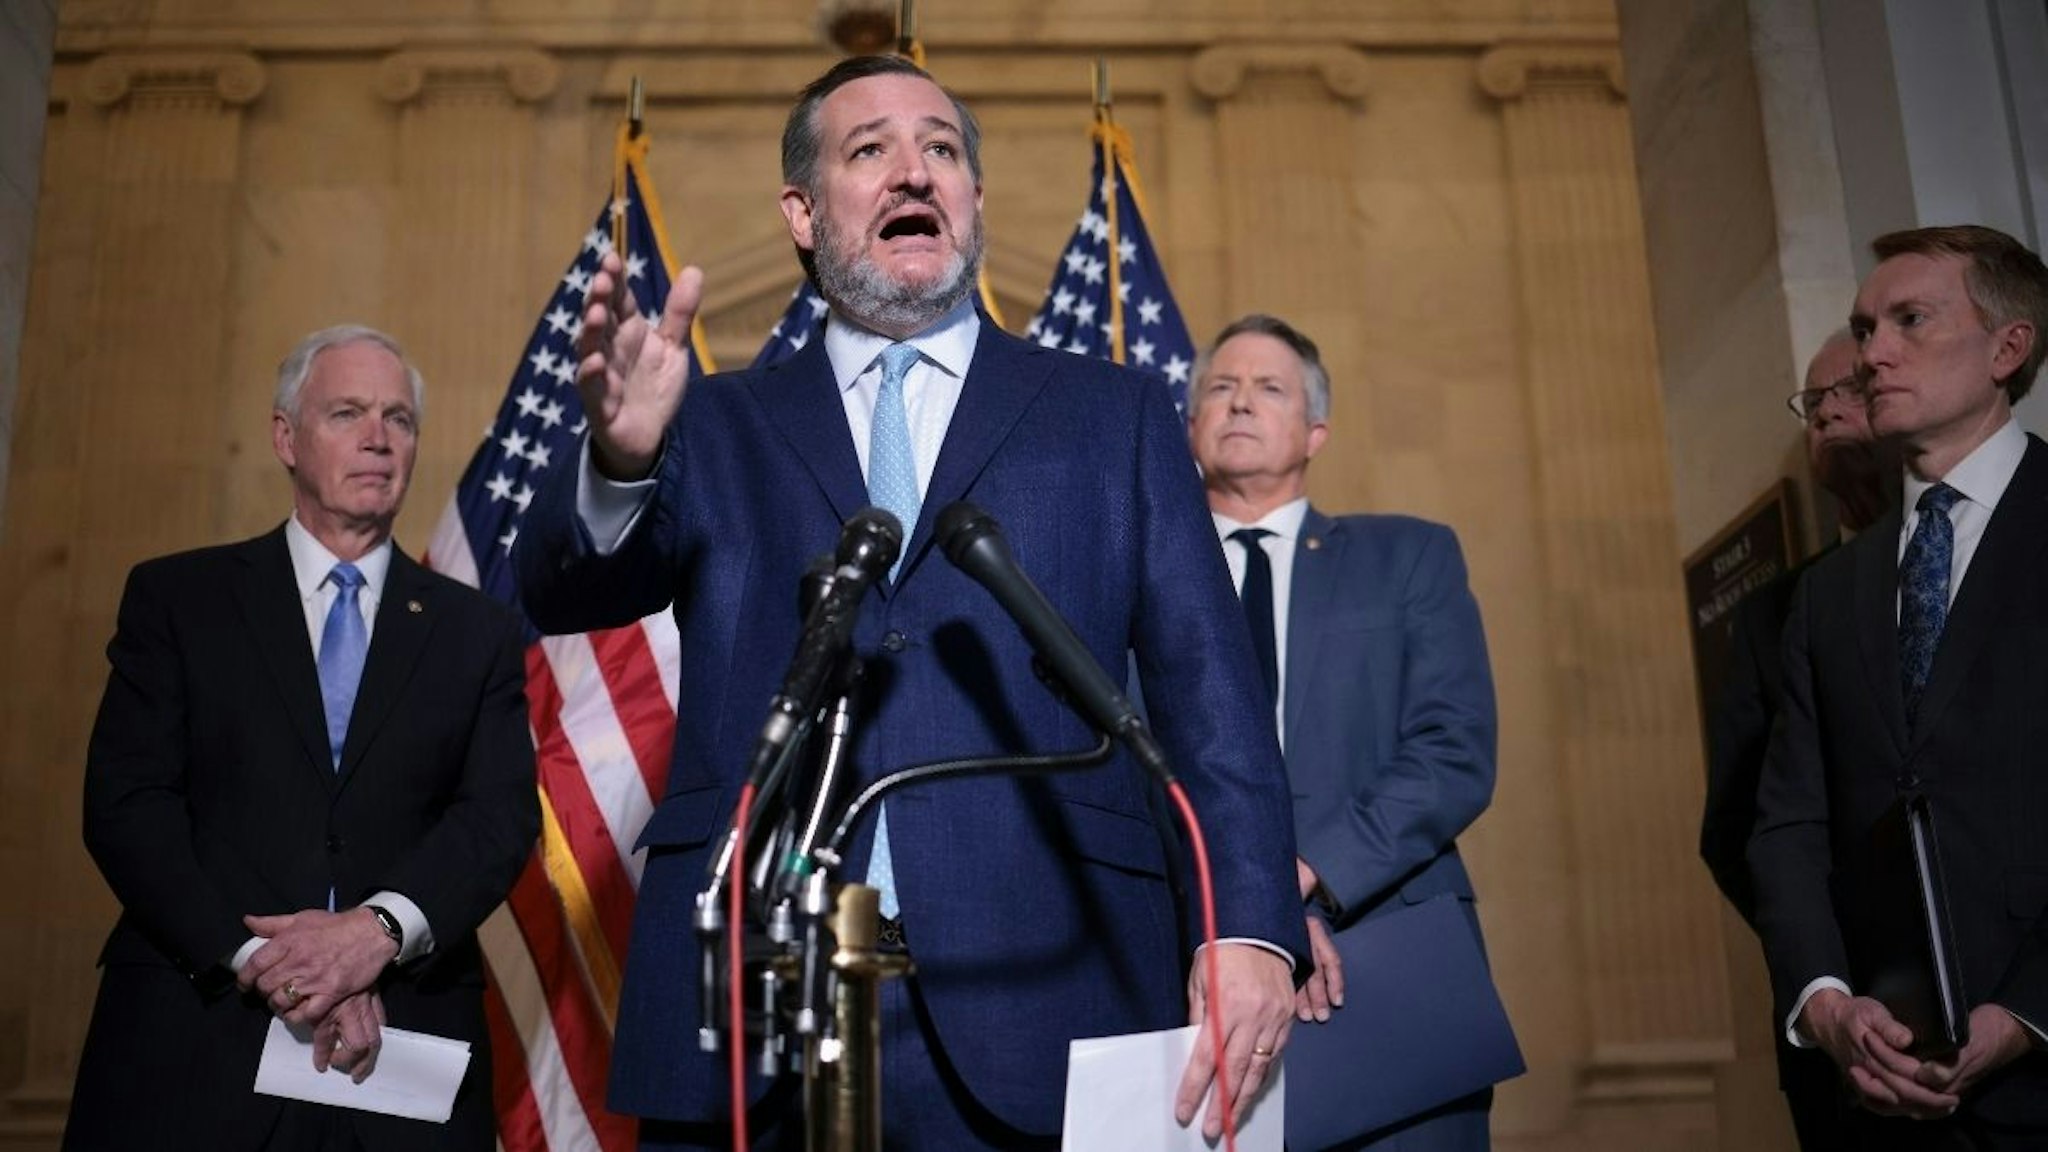 Sen. Ted Cruz (R-TX) speaks during a press conference on Capitol Hill on February 09, 2022 in Washington, DC.